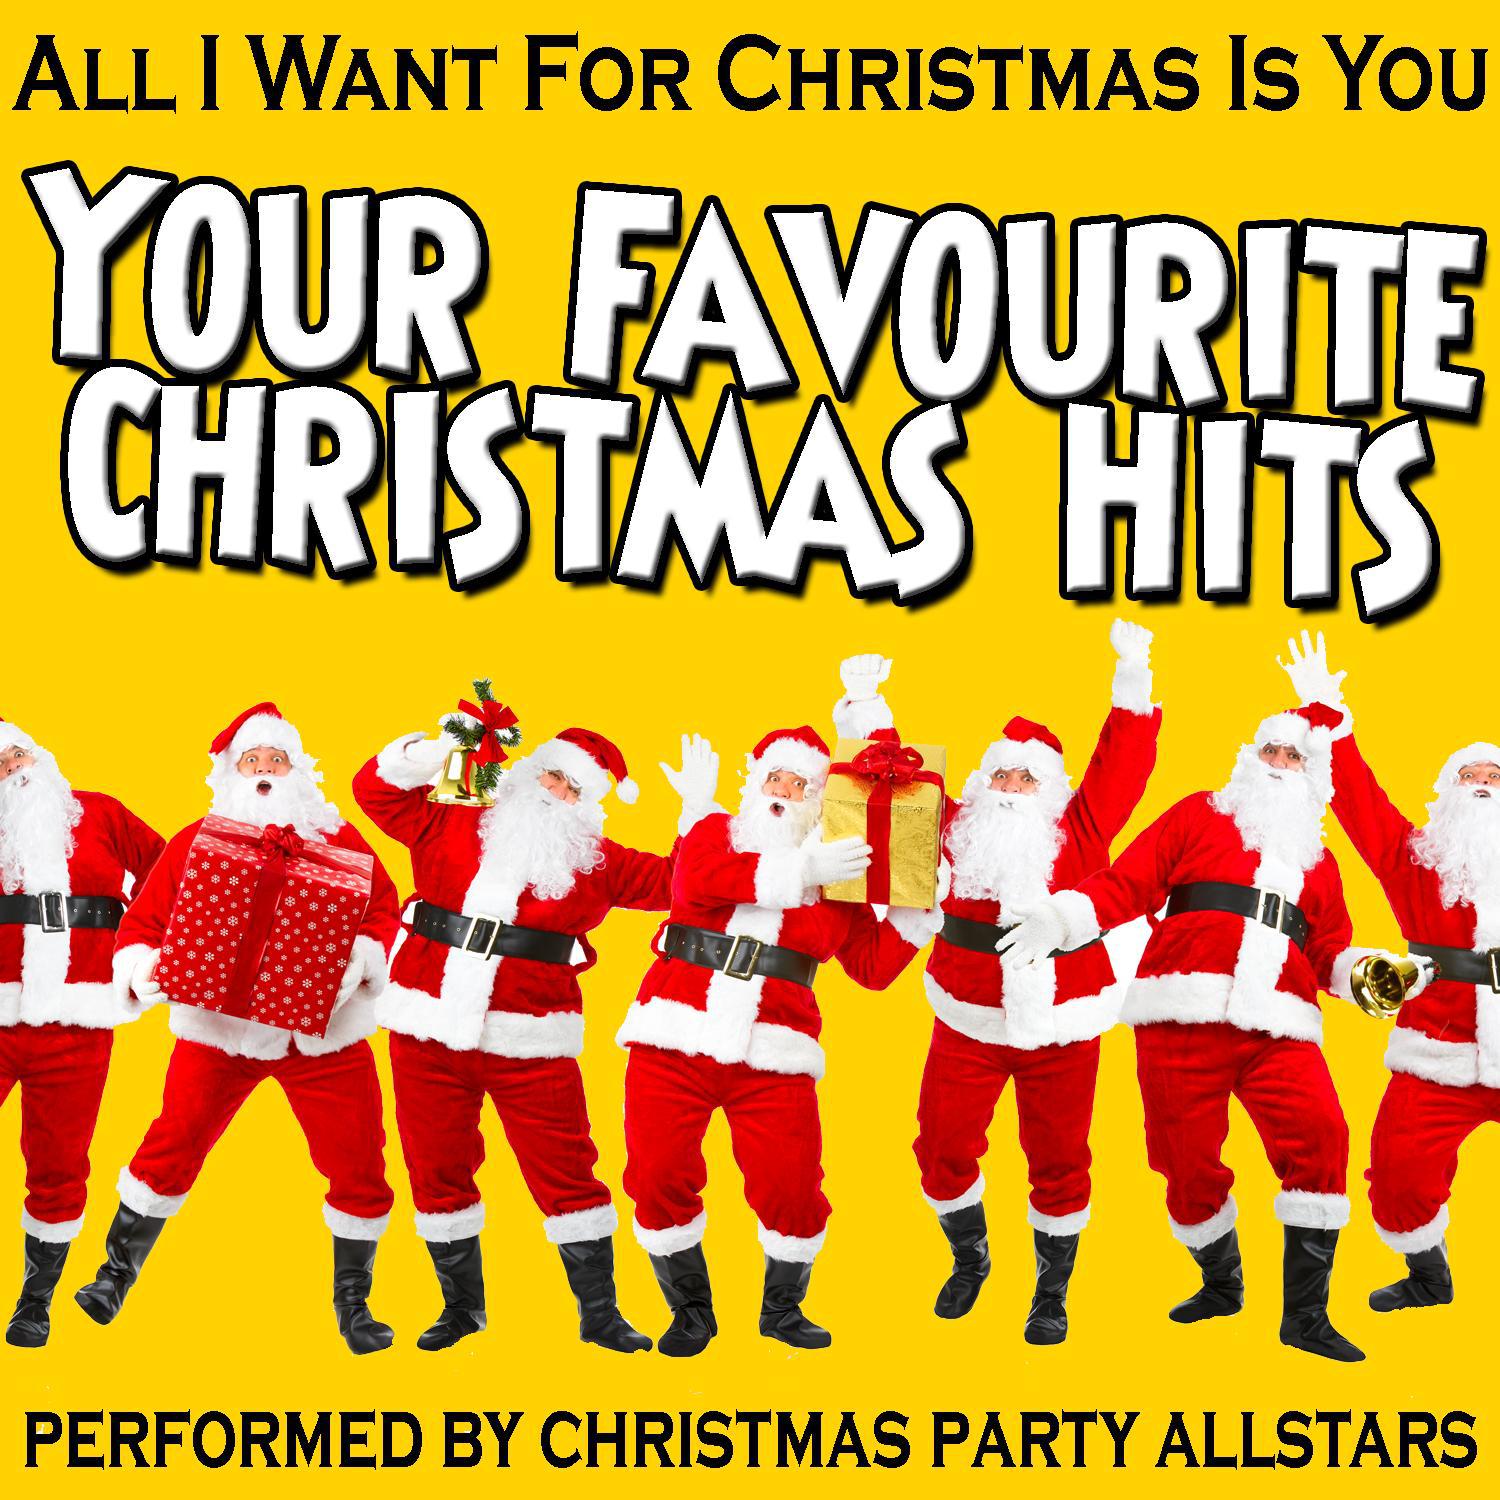 All I Want For Christmas Is You: Your Favourite Christmas Hits